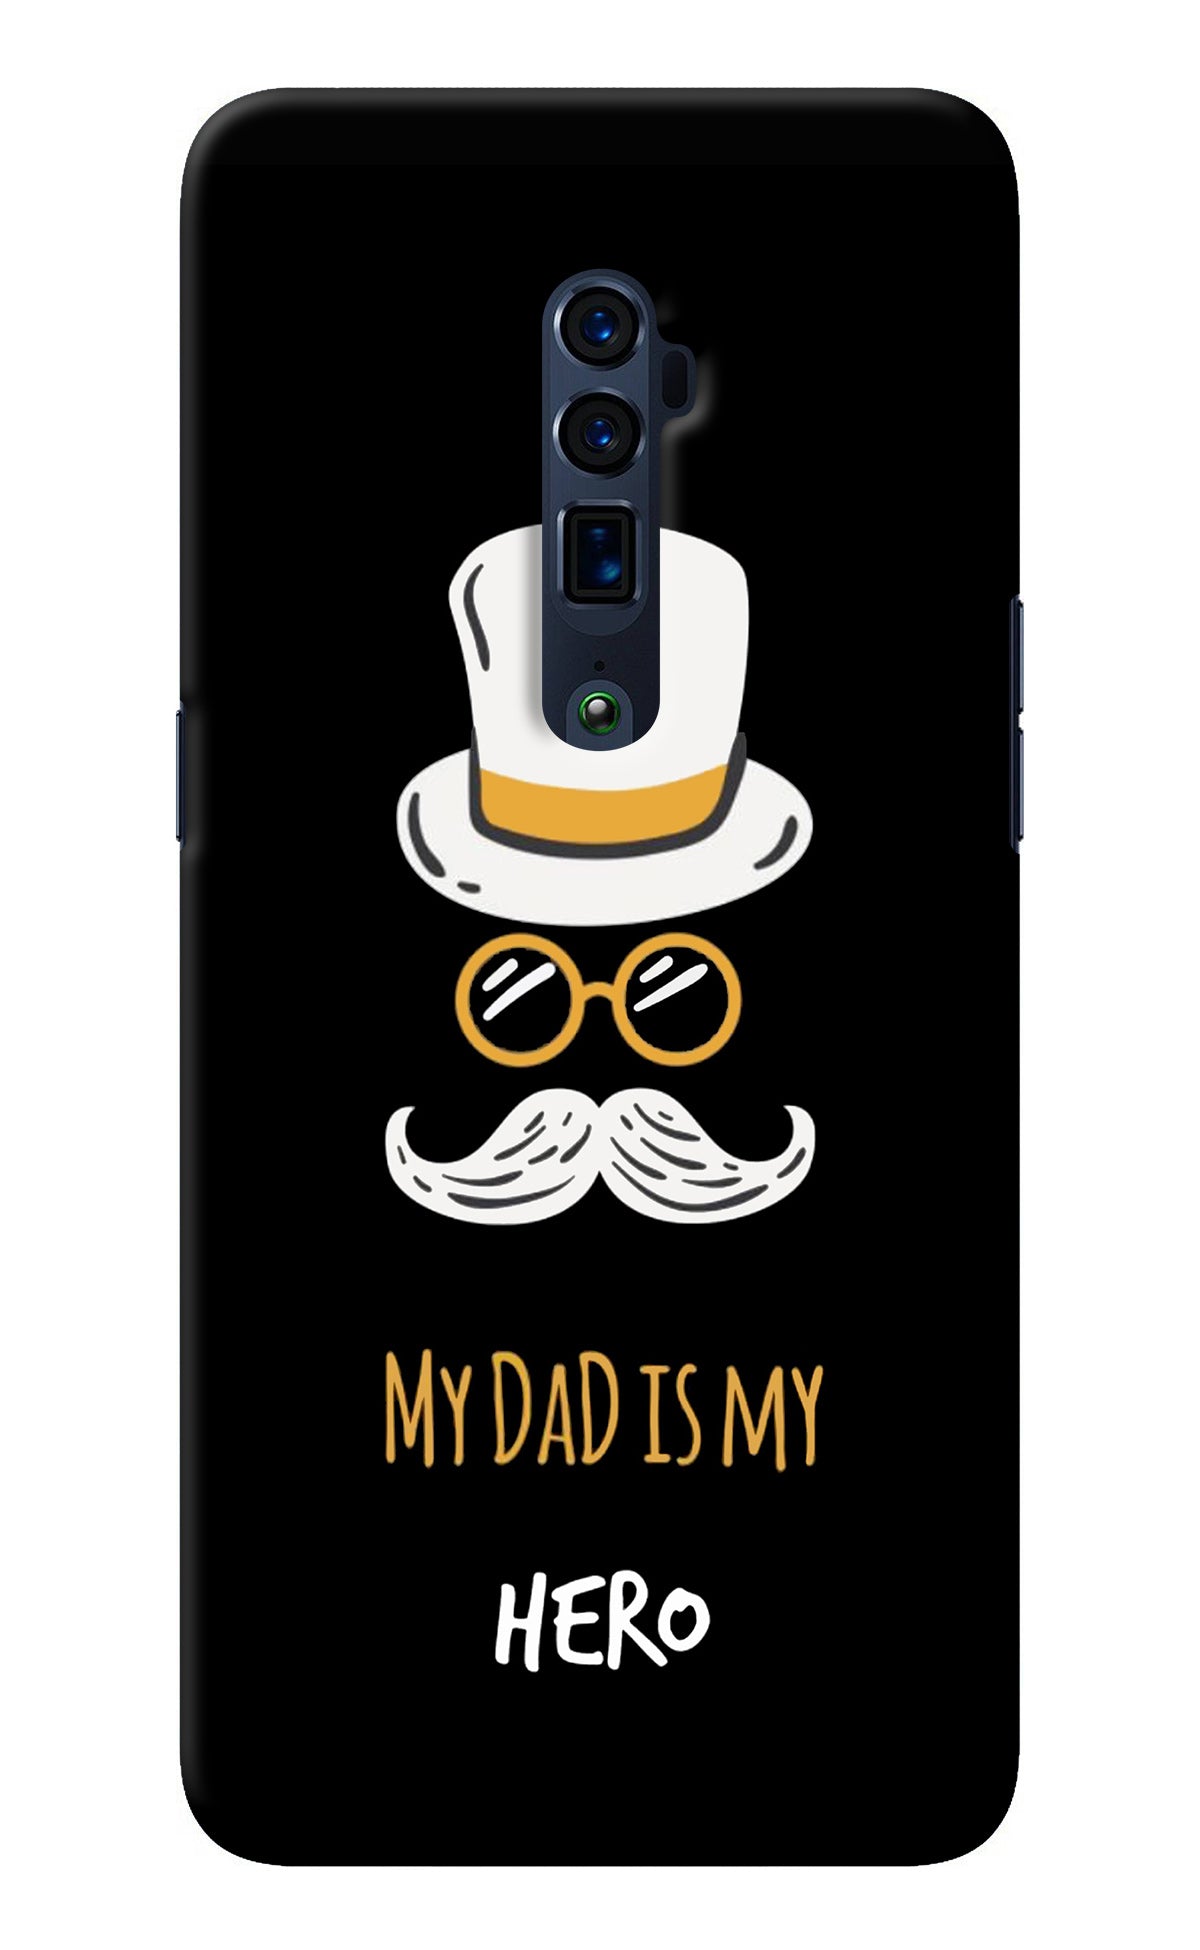 My Dad Is My Hero Oppo Reno 10x Zoom Back Cover